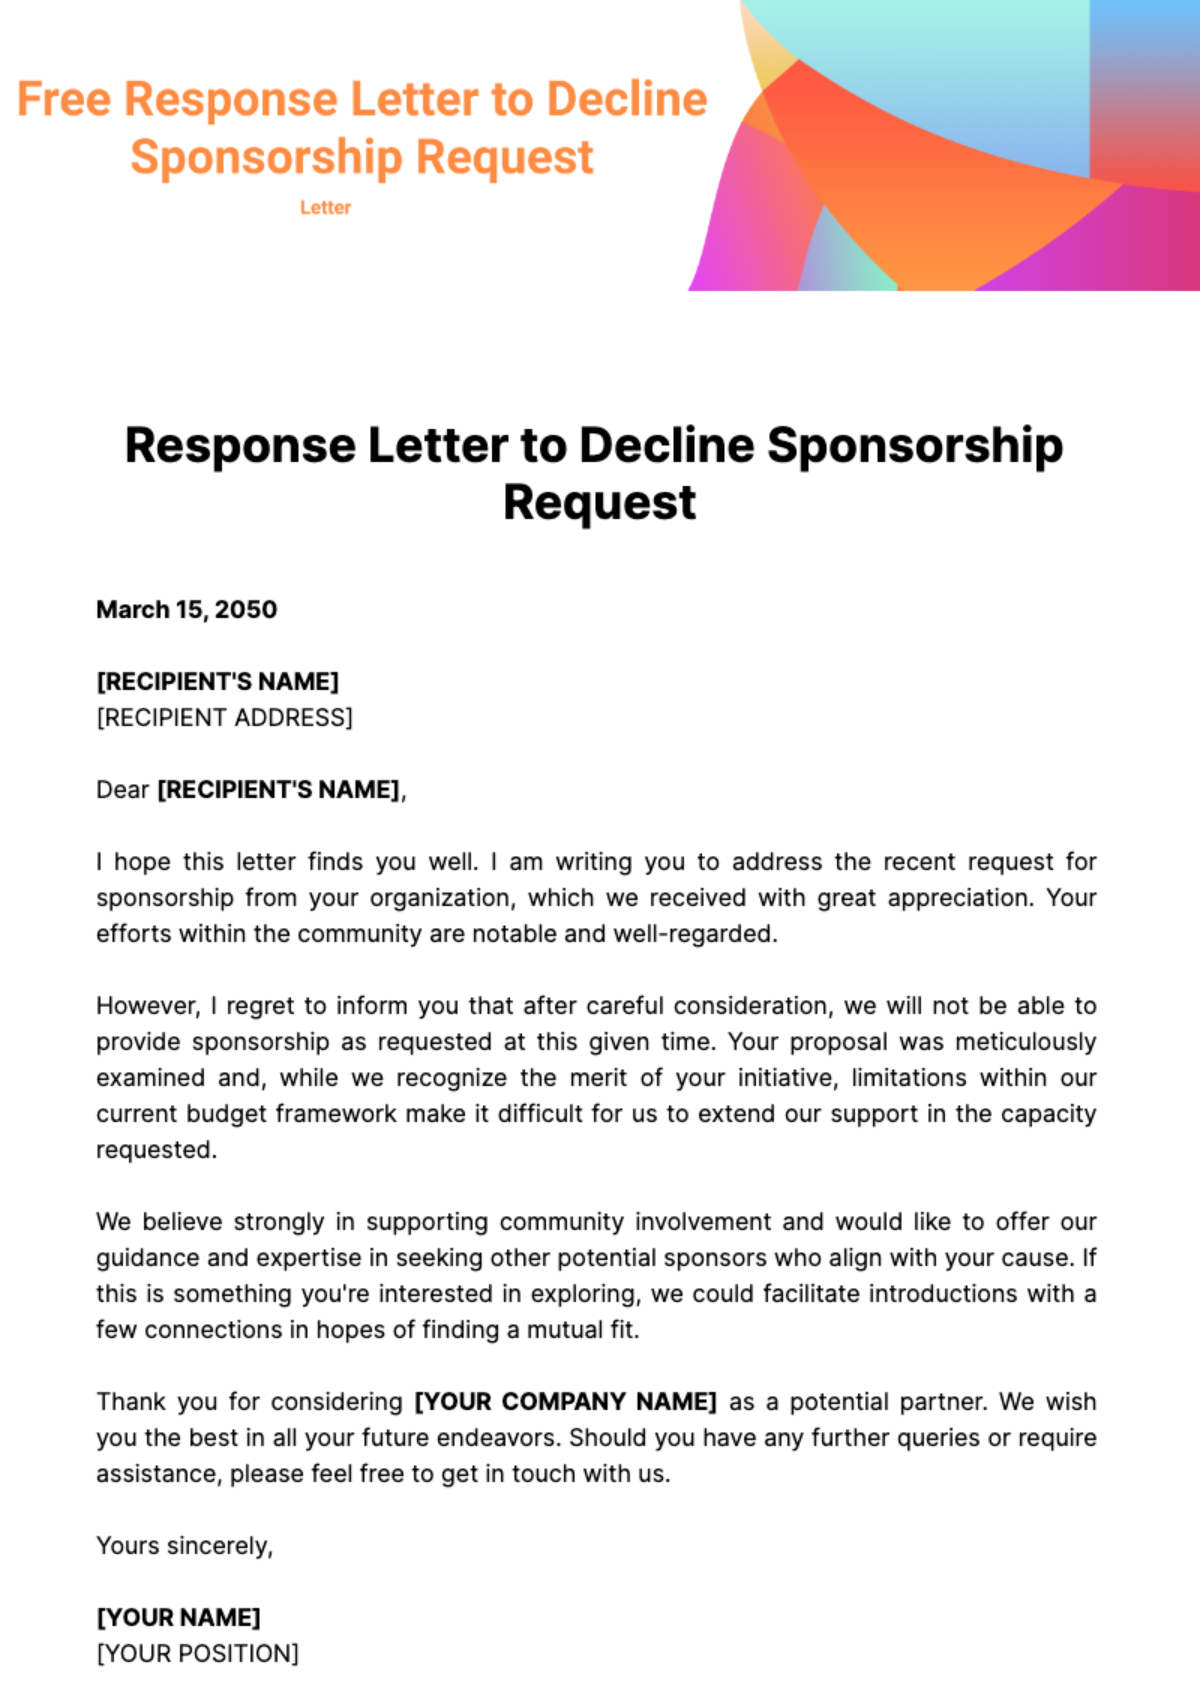 Free Response Letter to Decline Sponsorship Request Template